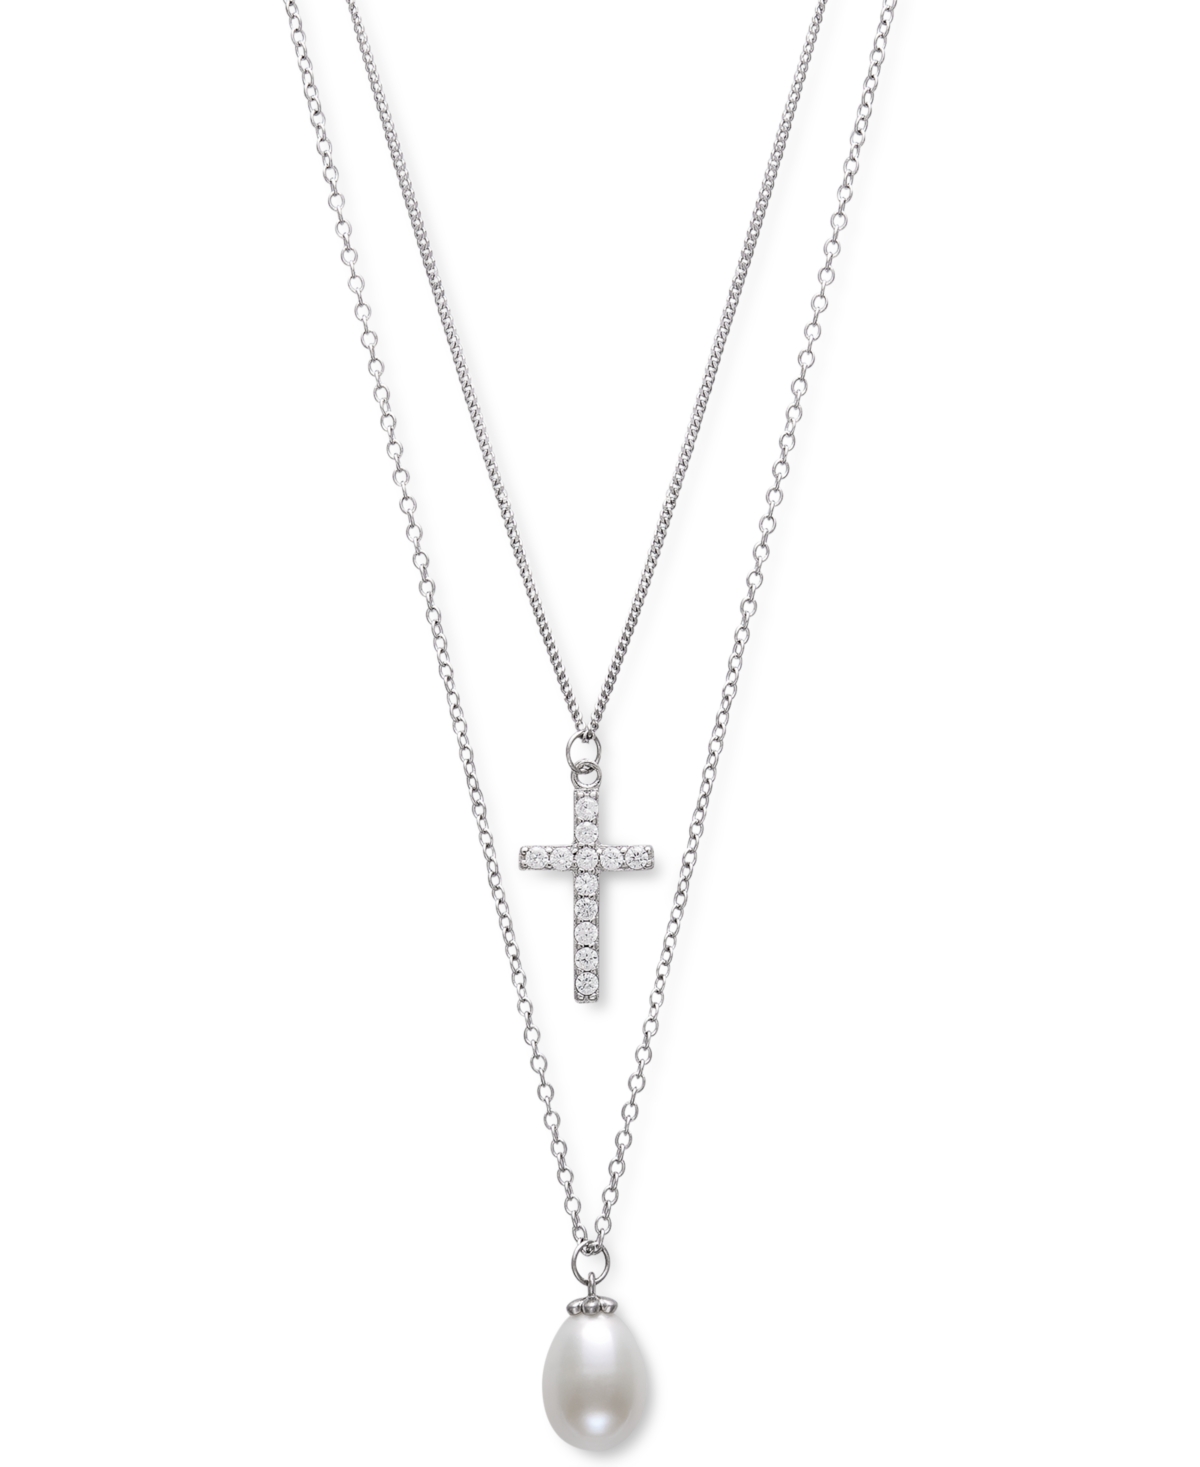 Belle De Mer Cultured Freshwater Pearl (8mm) & Cubic Zirconia Cross Layered Necklace in Sterling Silver, 16" + 1" extender